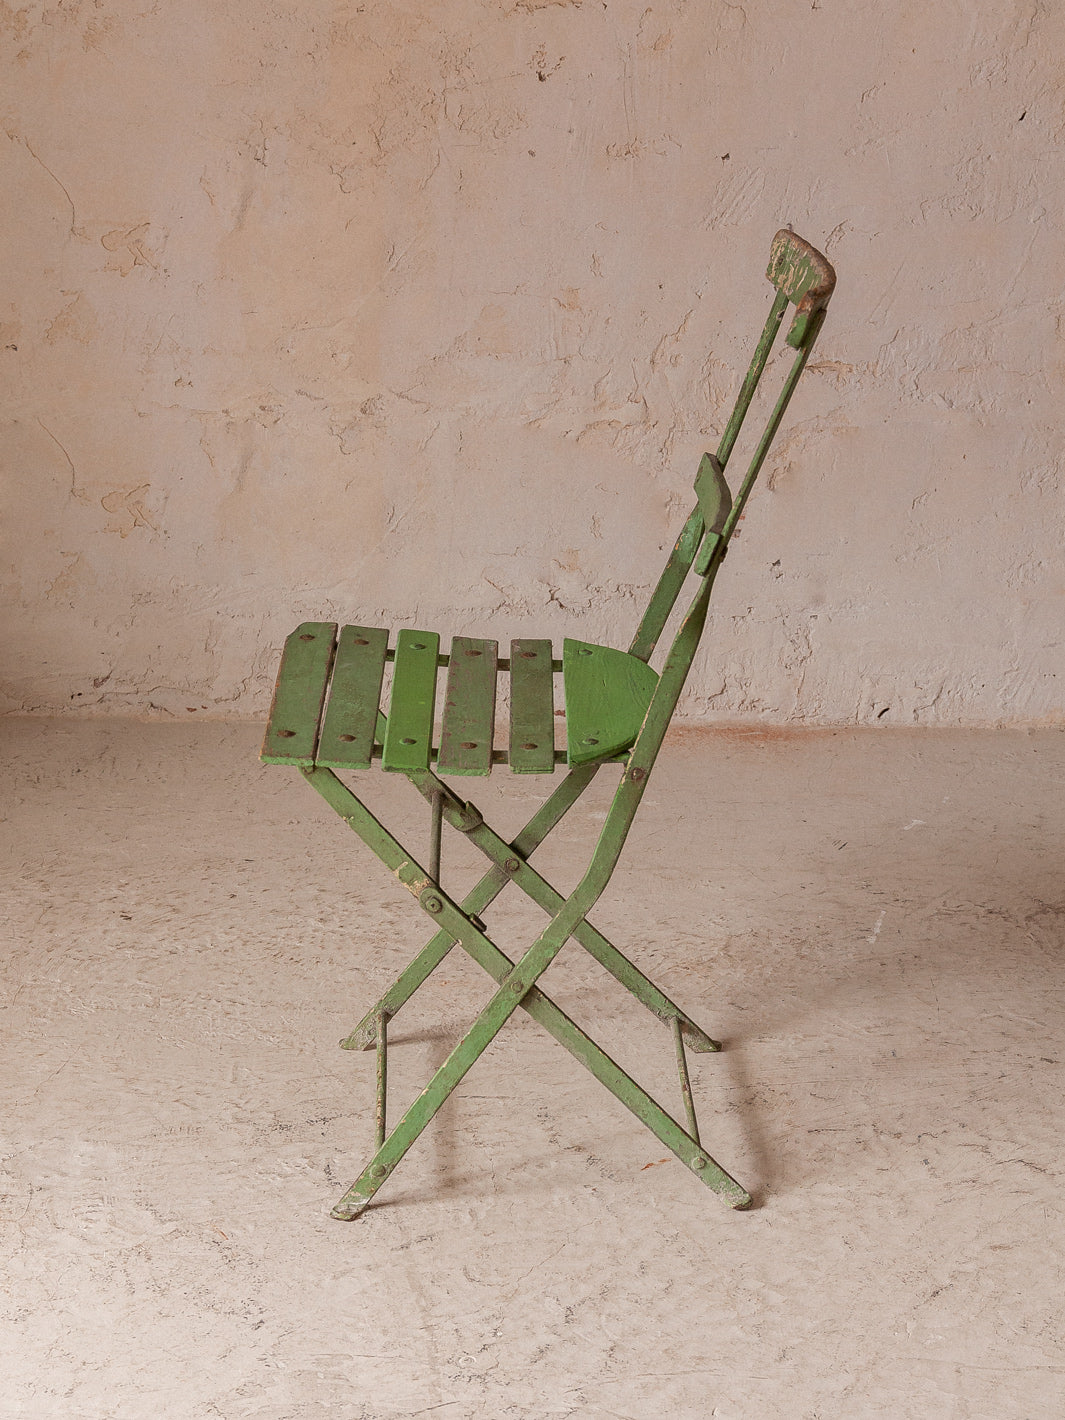 Set of 4 green folding chairs from the 60s